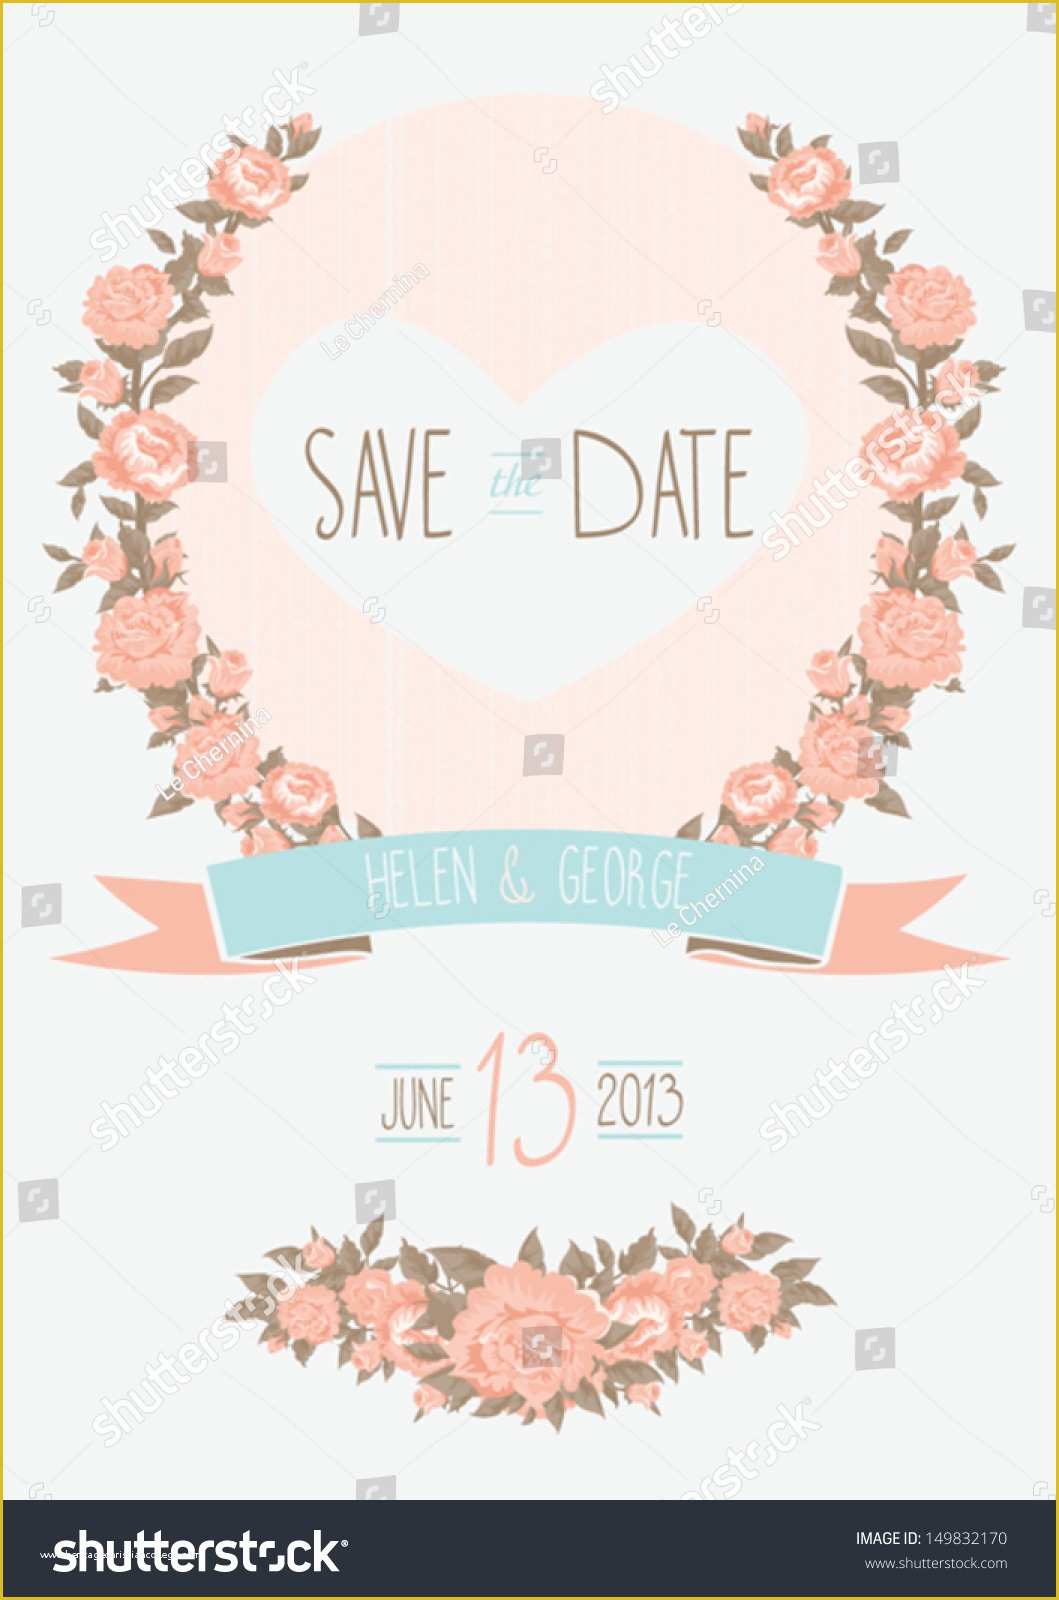 Free Save the Date Wedding Invitation Templates Of Save Date Wedding Invitation Shabby Chic Stock Vector